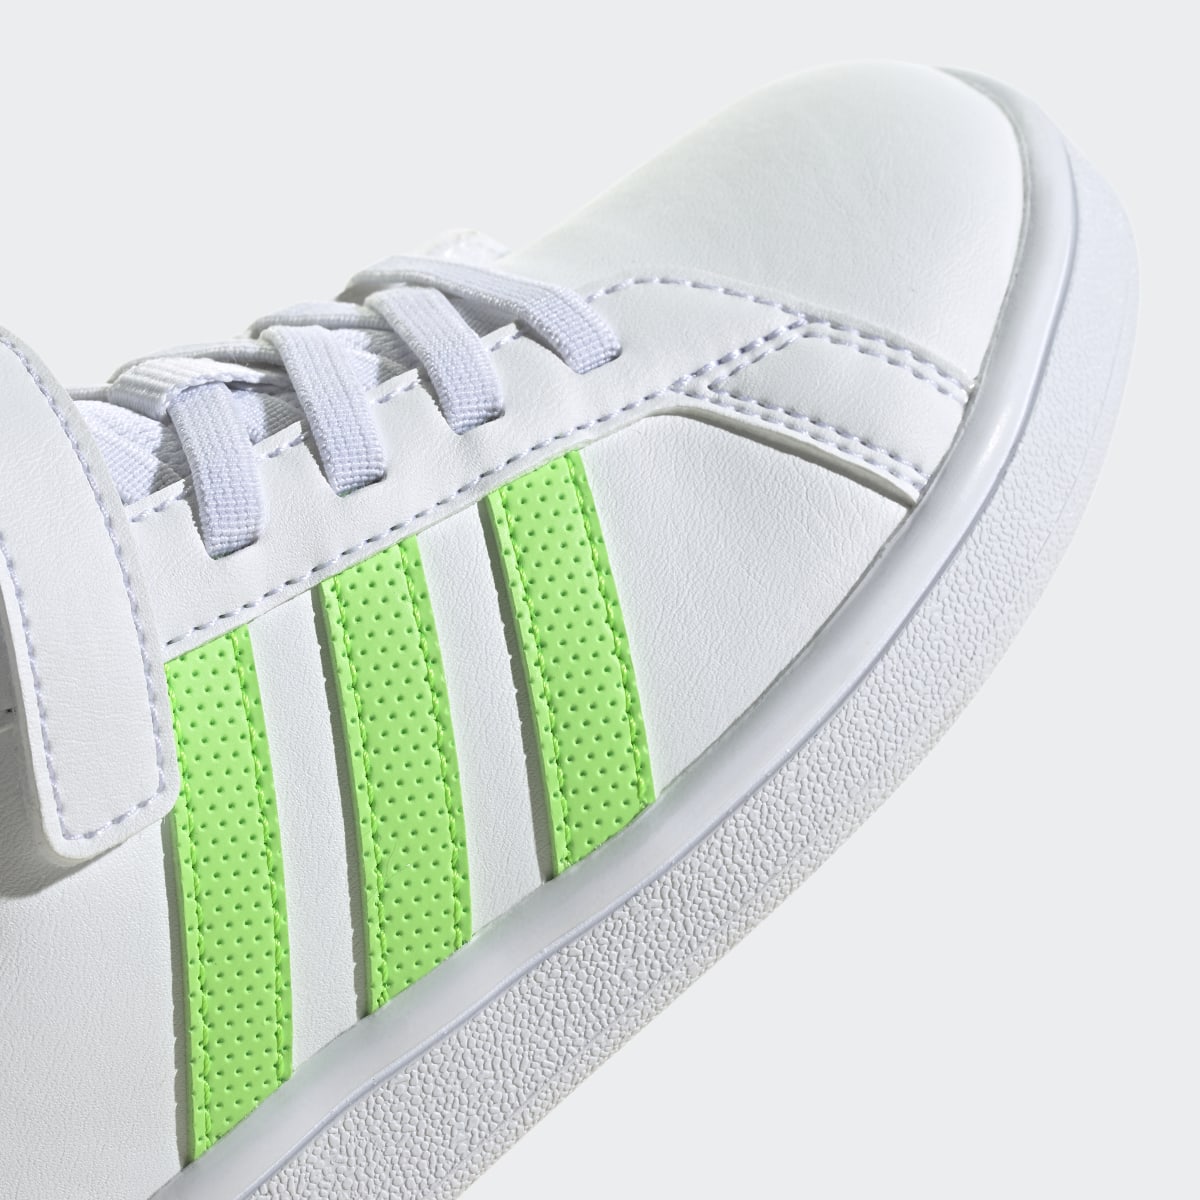 Adidas Grand Court Shoes. 9